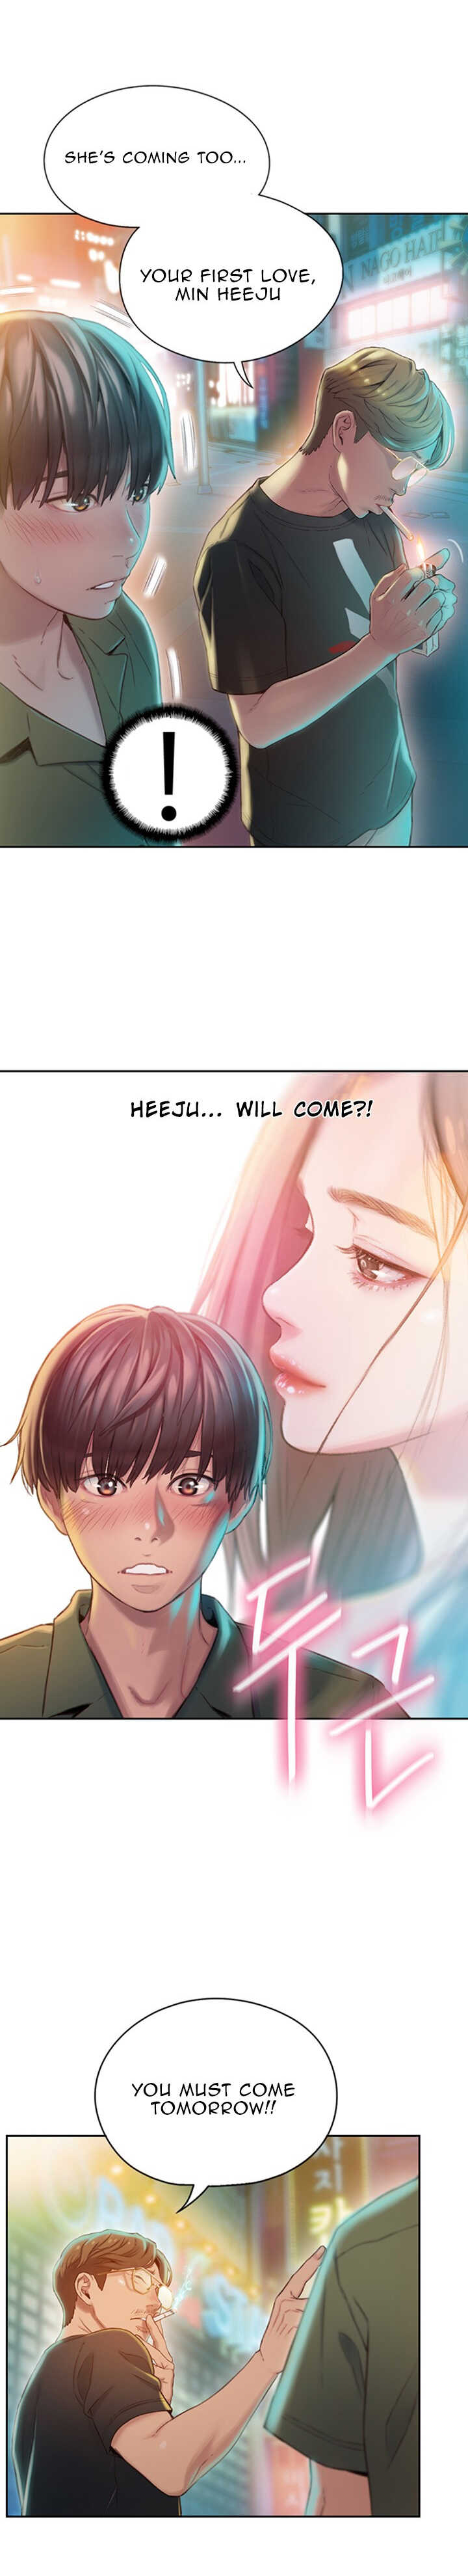 [Park Hyeongjun] Love Limit Exceeded (01-23) Ongoing - Page 29